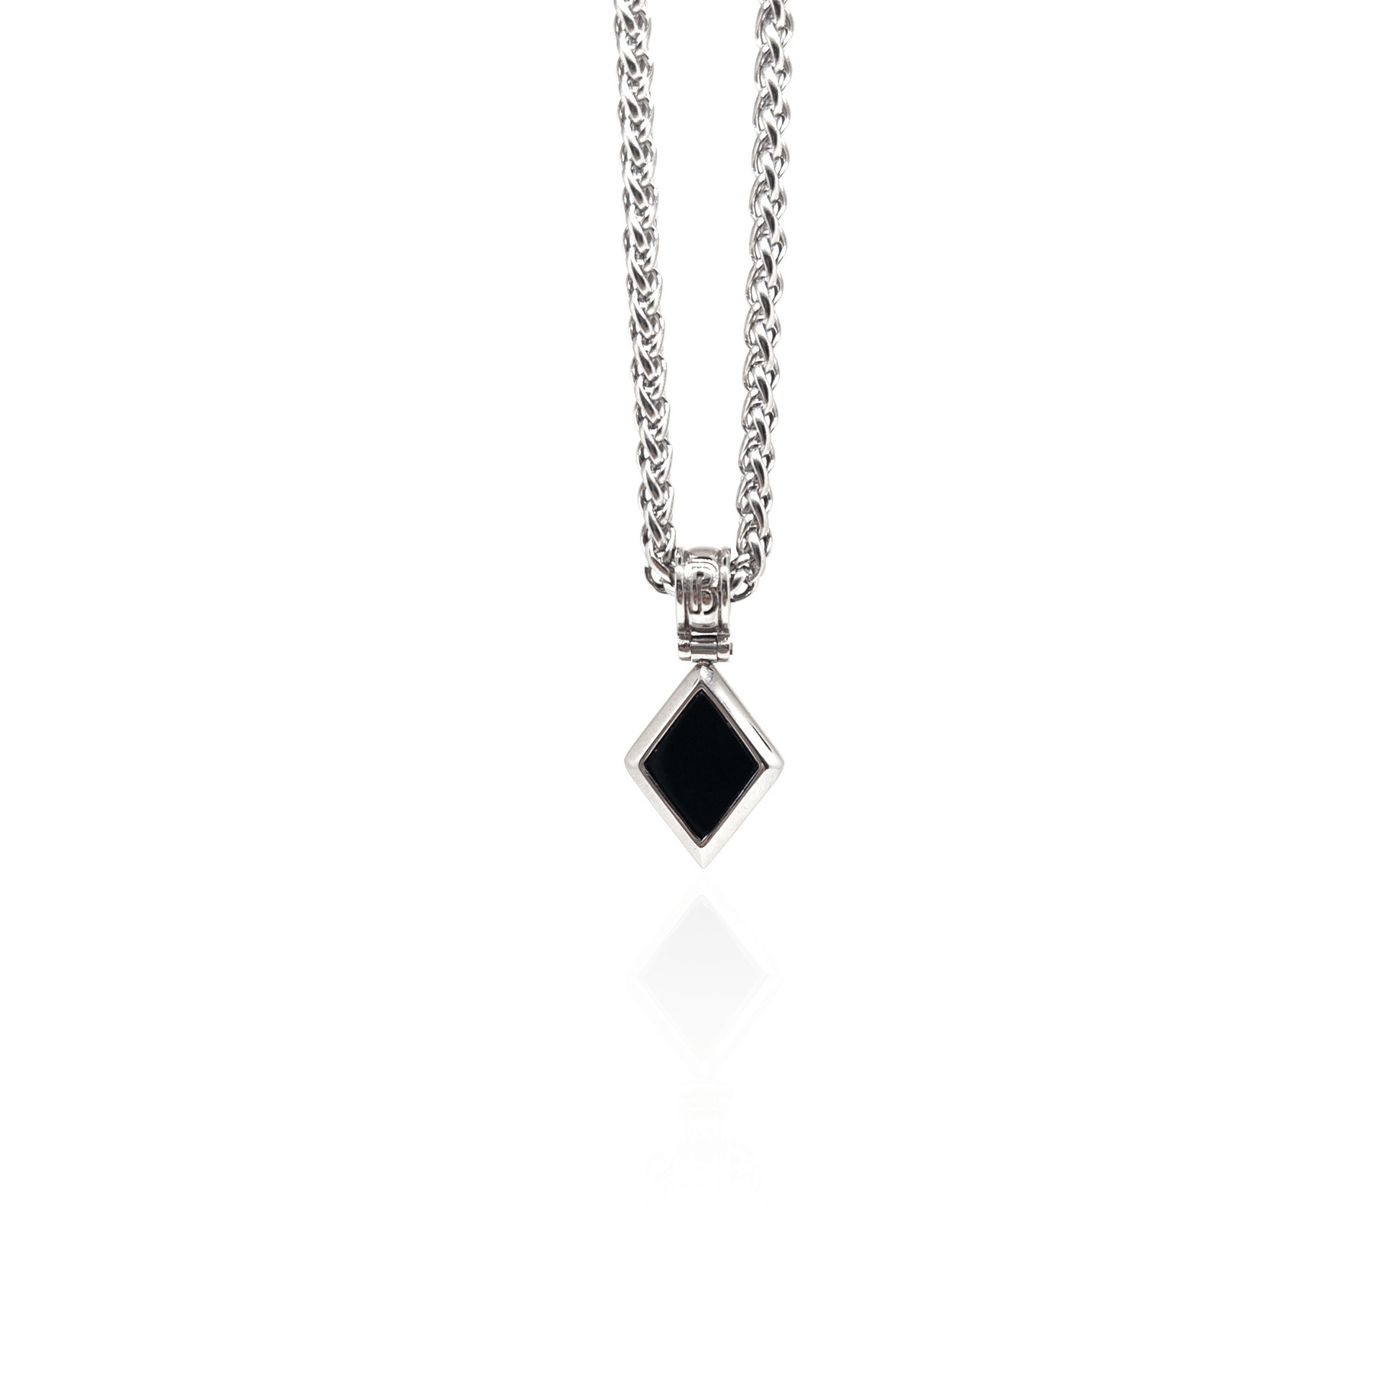 The Silver Plated Onyx Necklace